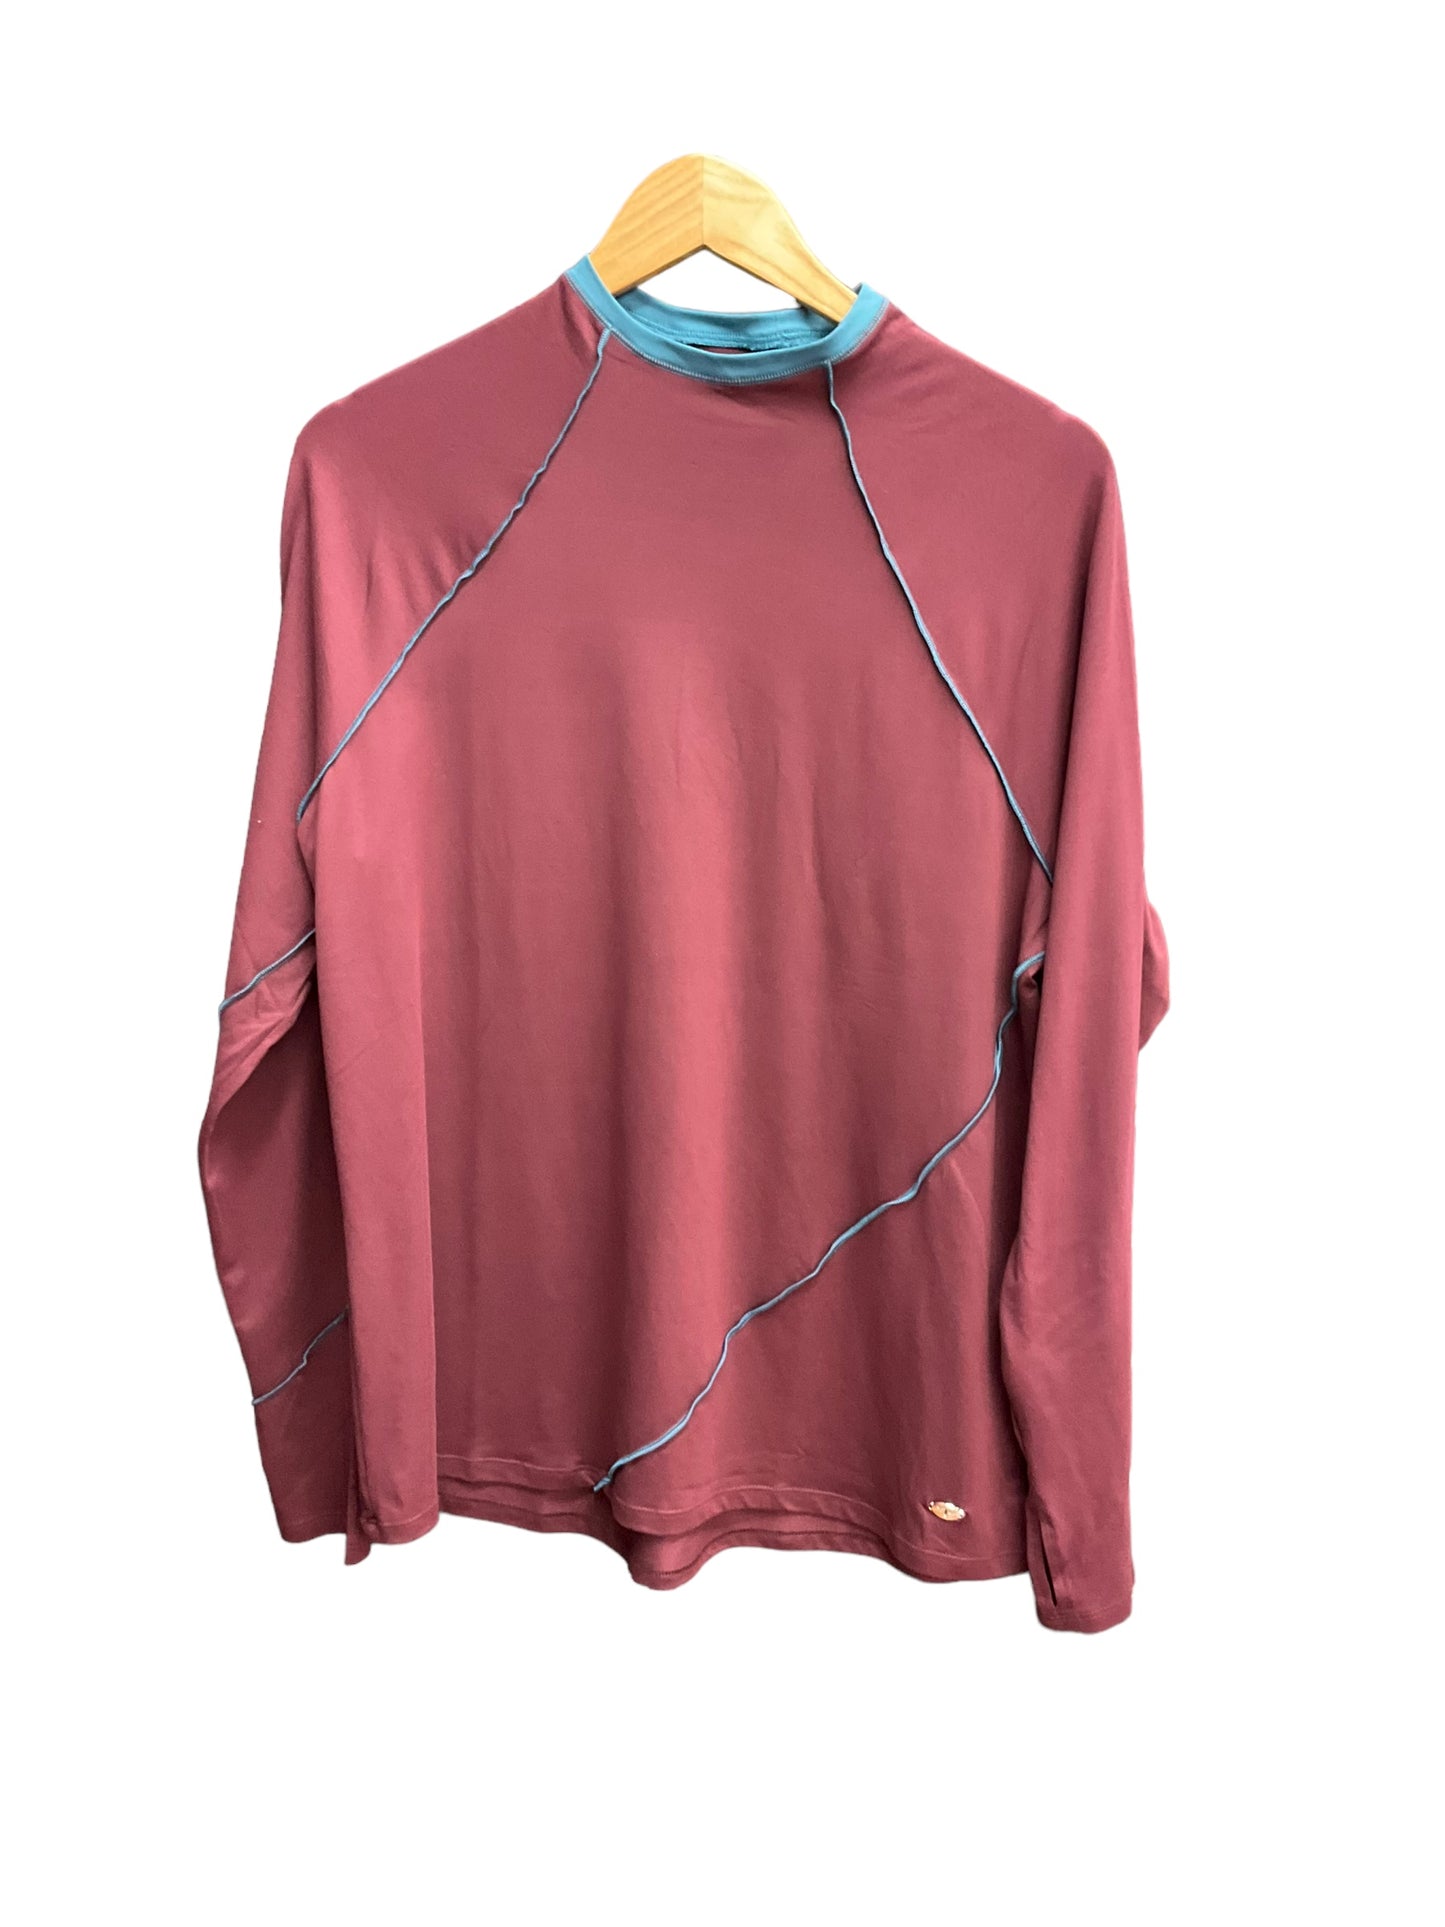 Athletic Top Long Sleeve Crewneck By Tahari By Arthur Levine  Size: L